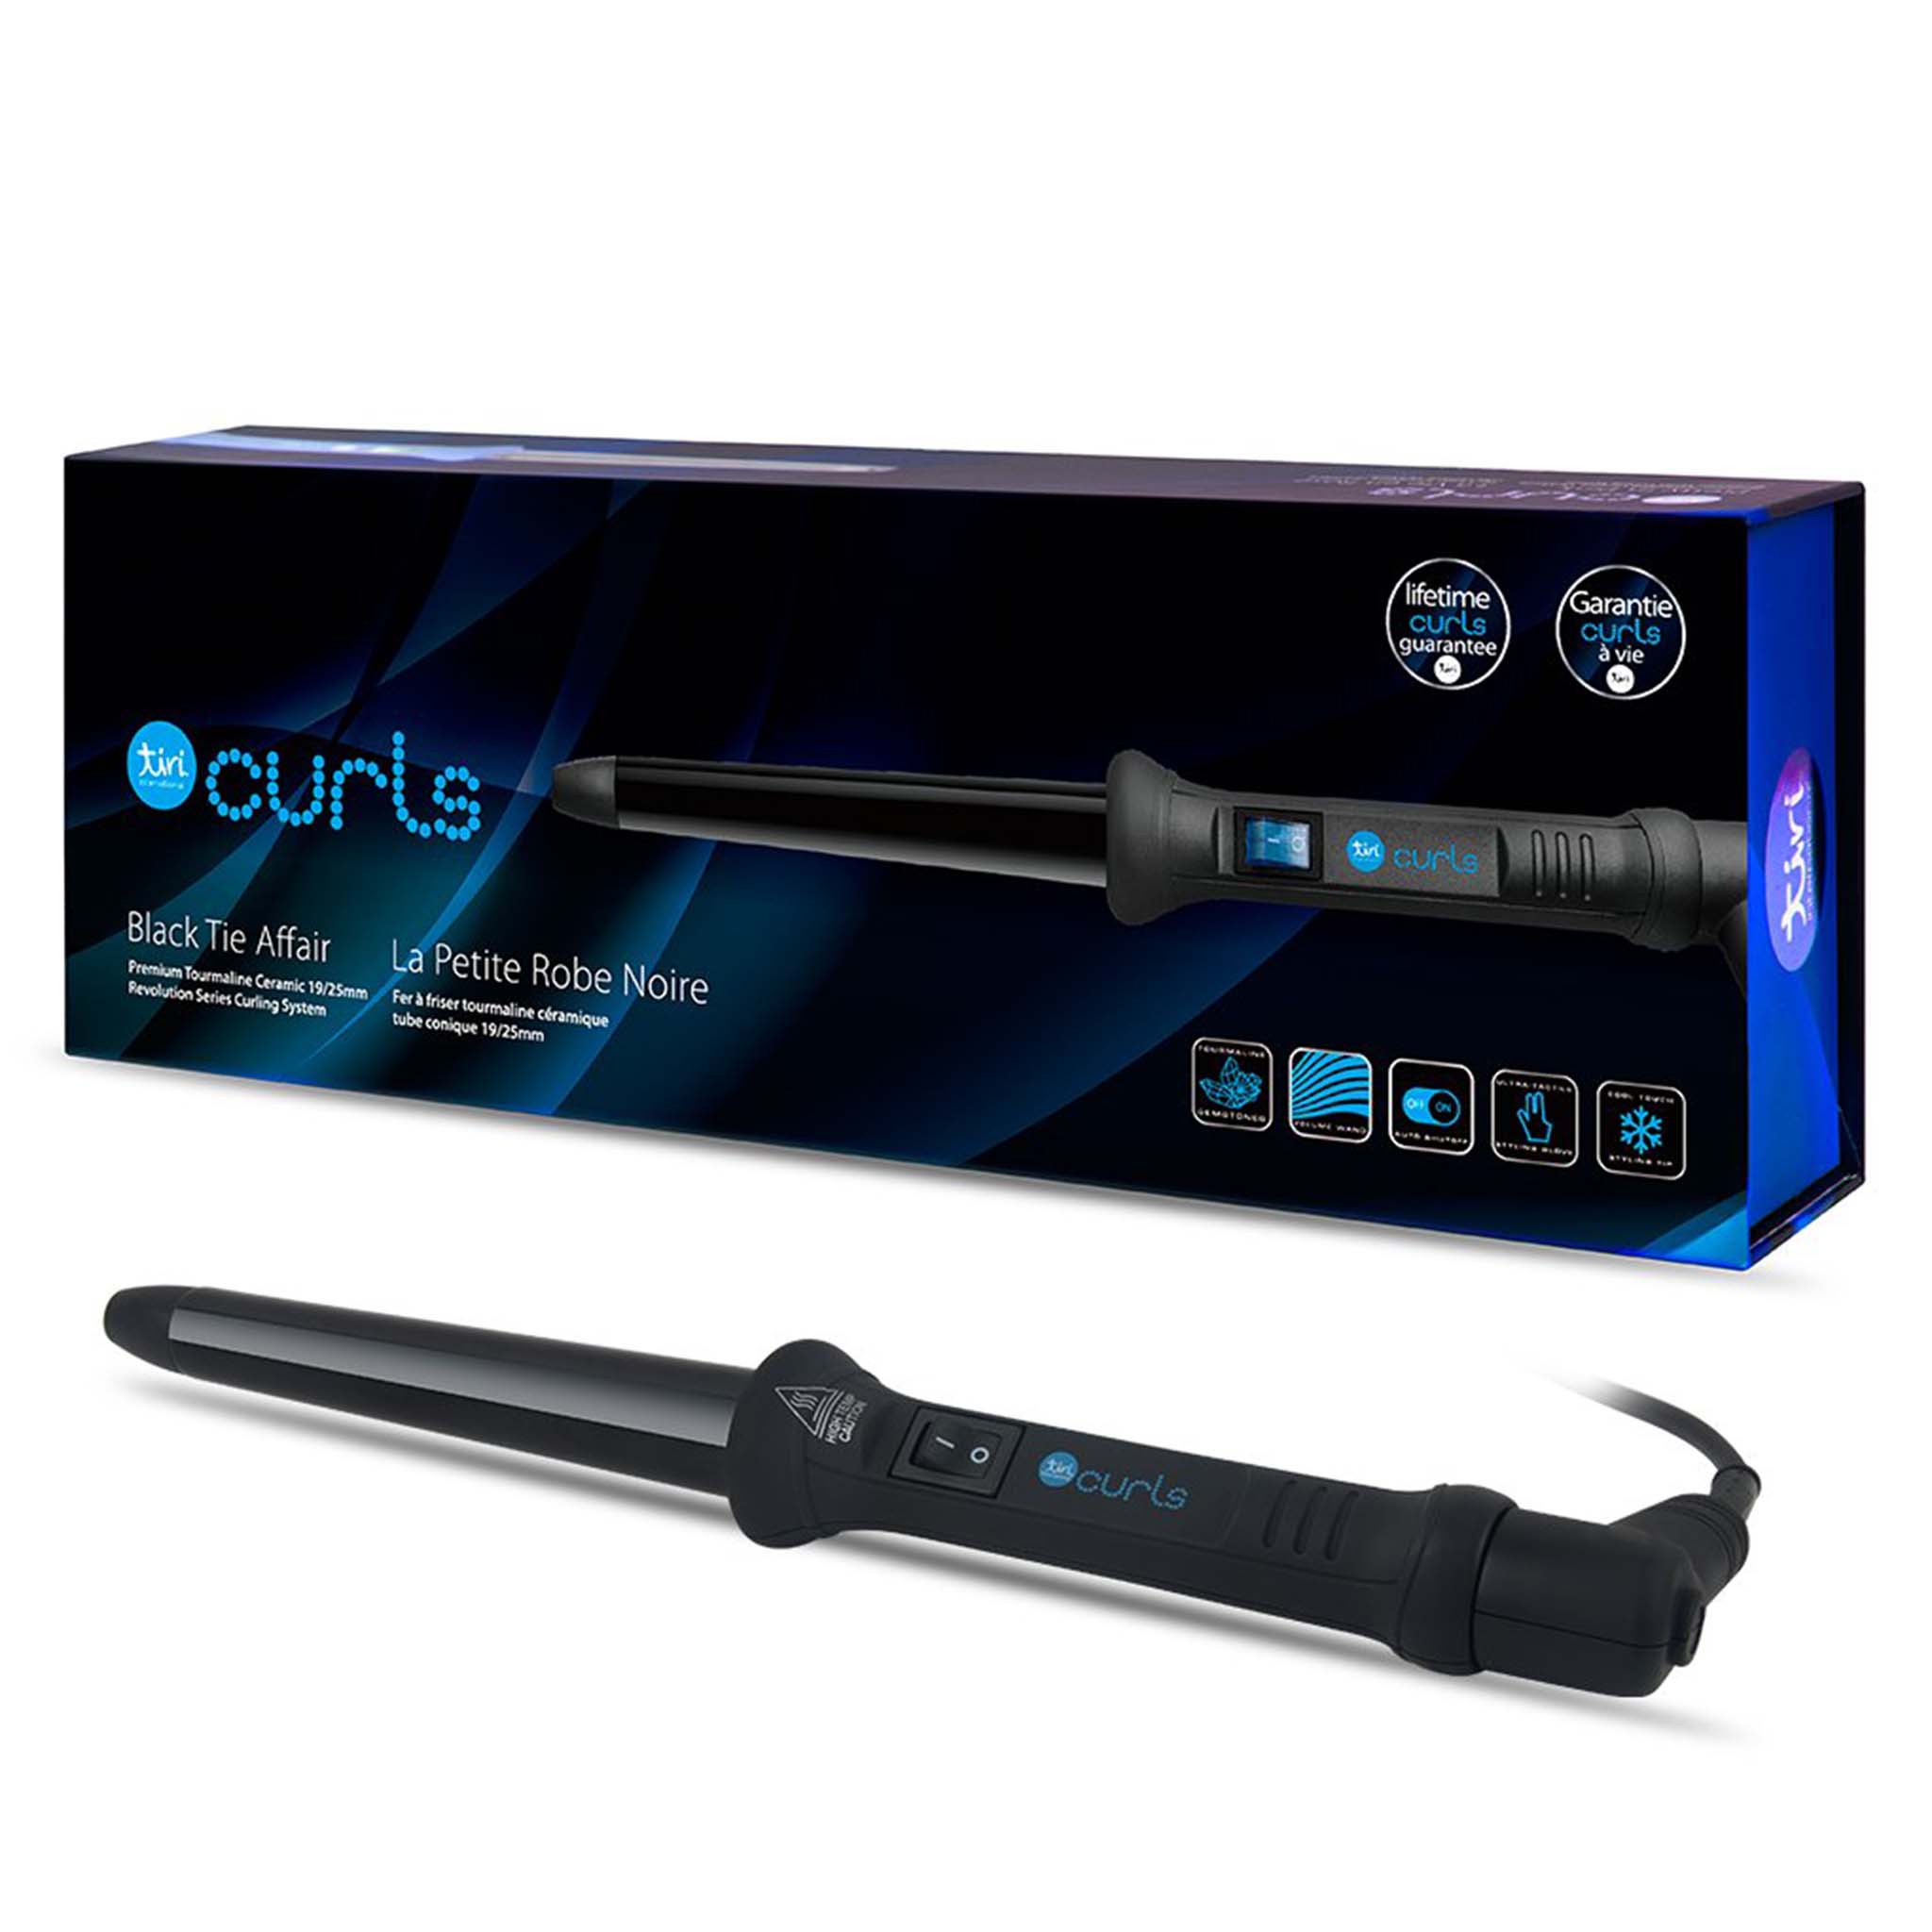 19mm/25mm Clipless Curling Iron w/ Heat Glove Included - Pretty in Blue